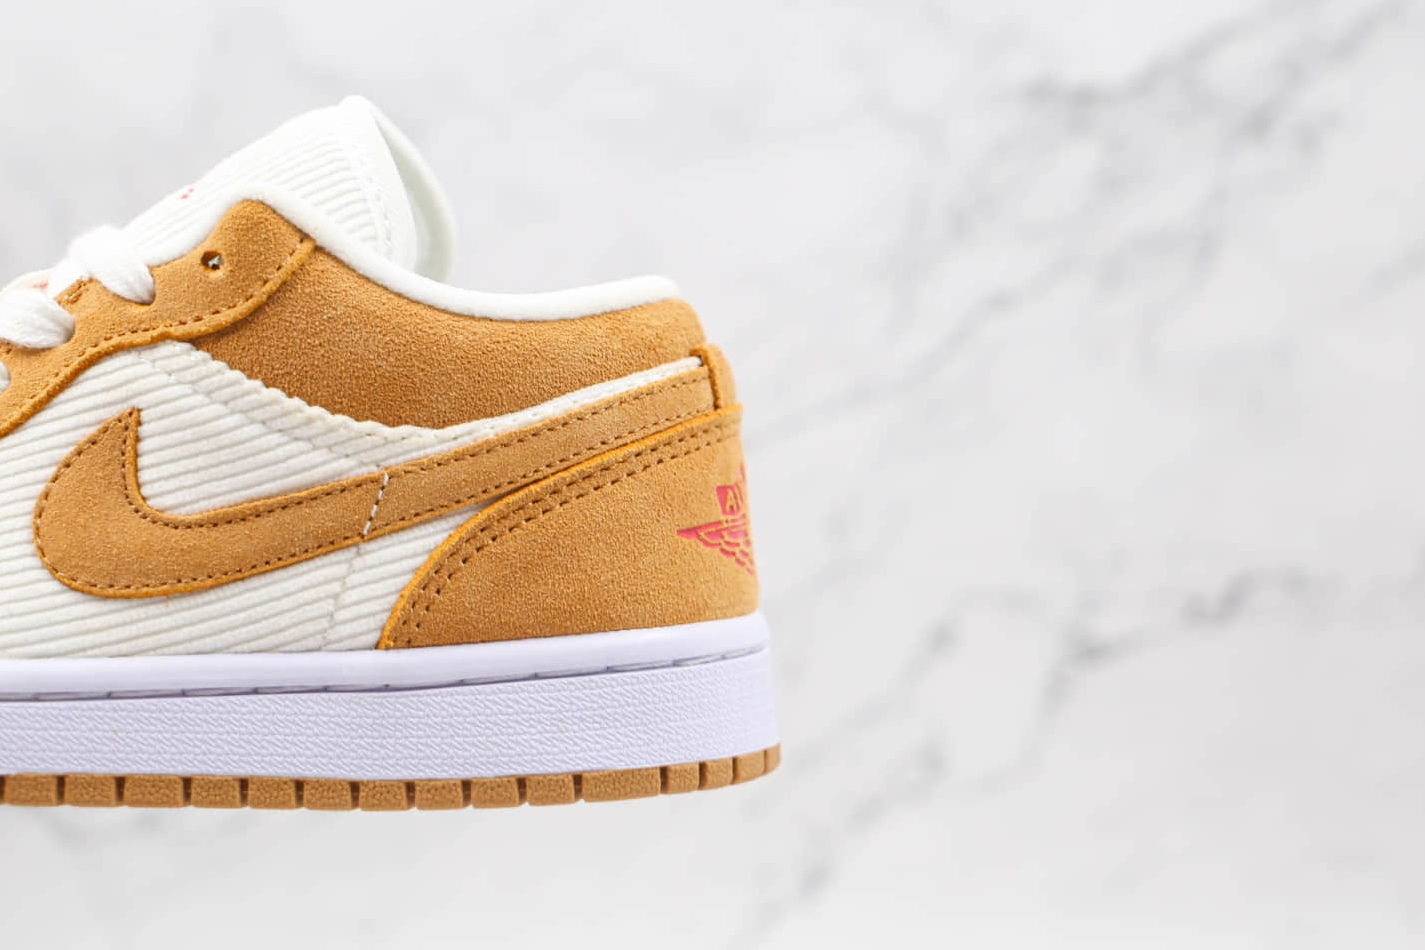 Air Jordan 1 Low SE 'Twine' DH7820-700 - Buy Stylish and Comfortable Sneakers Online